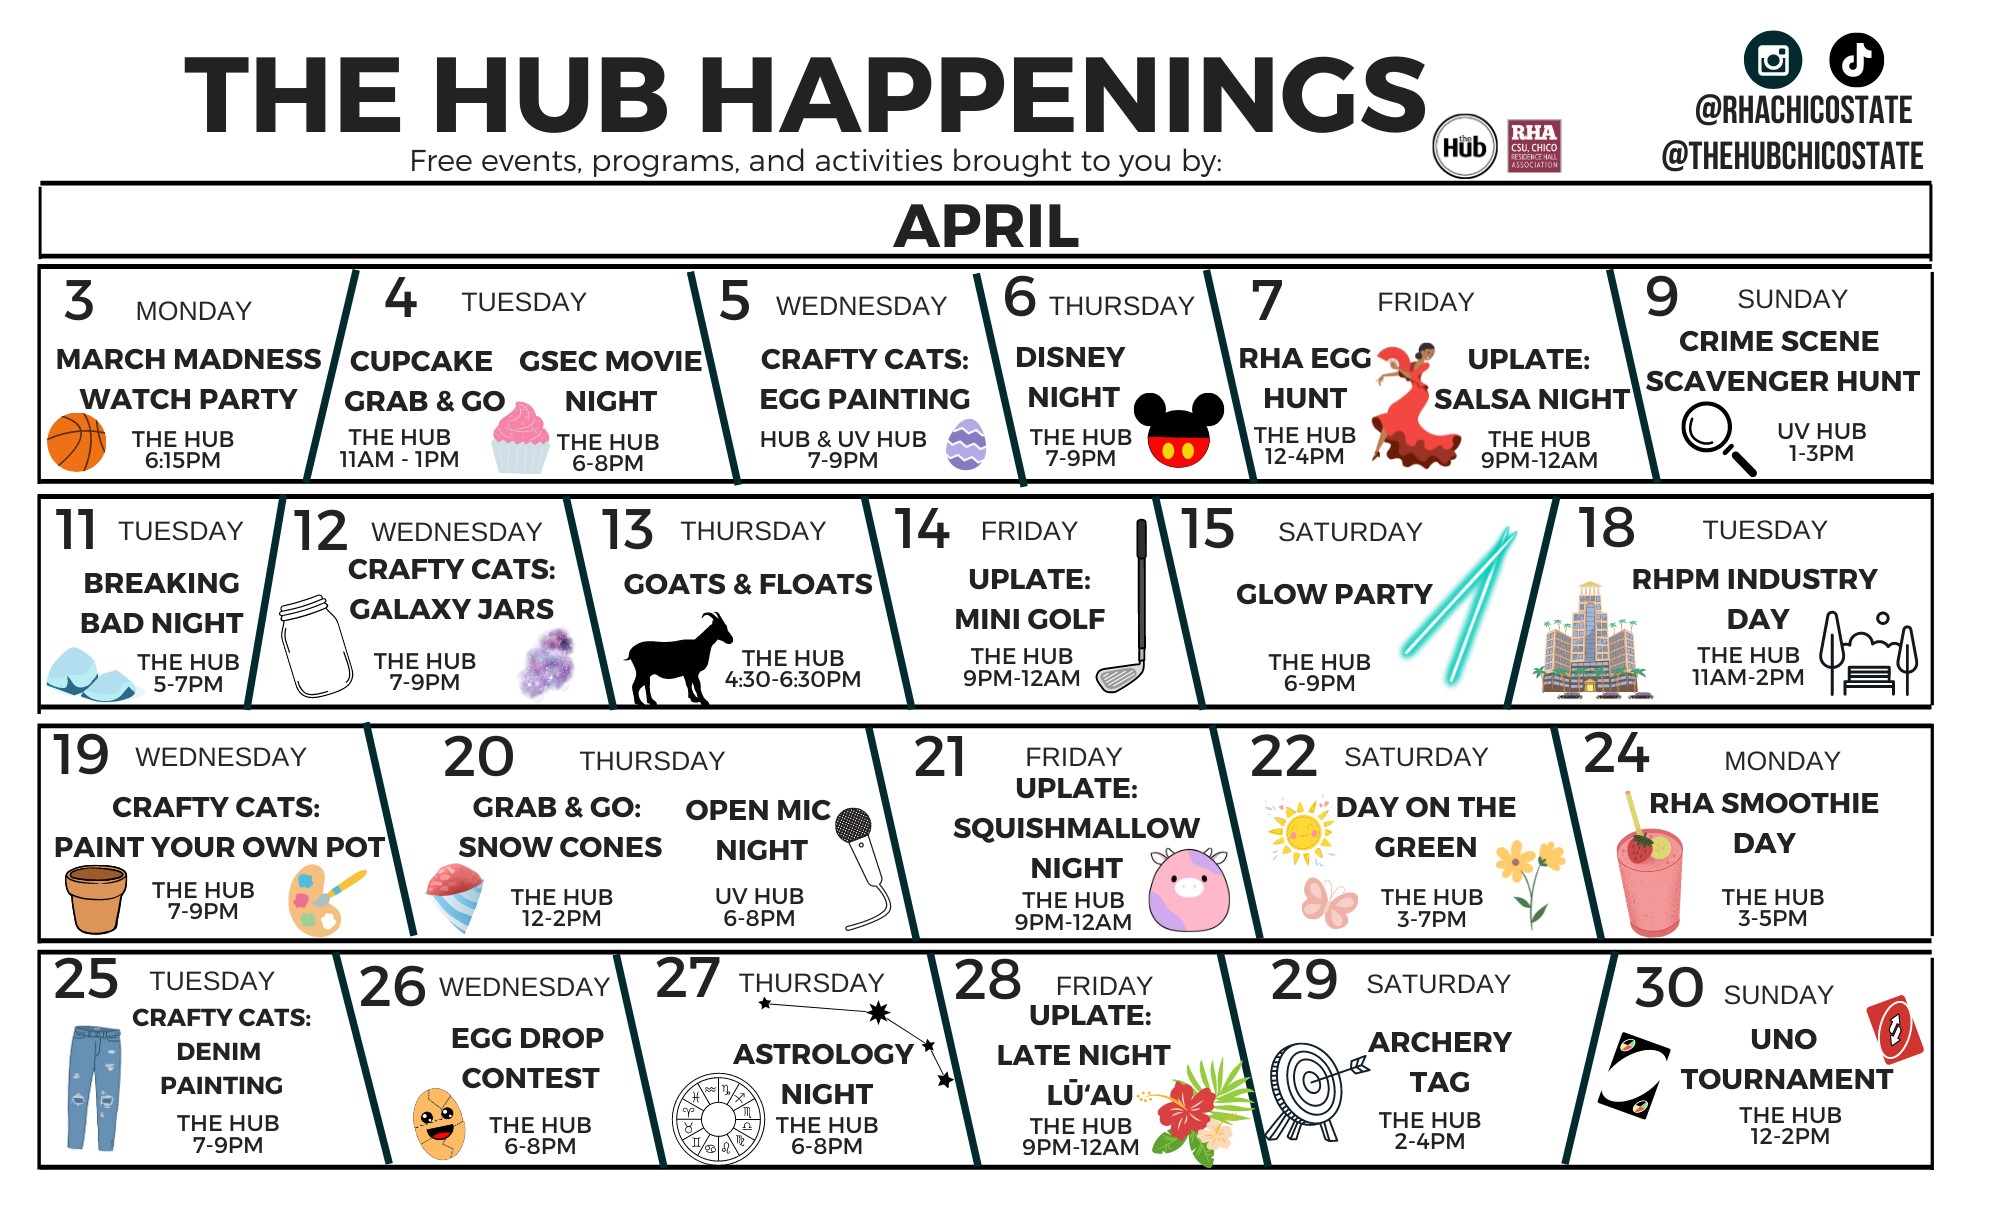 Calendar of events for The Hub for April 2023.